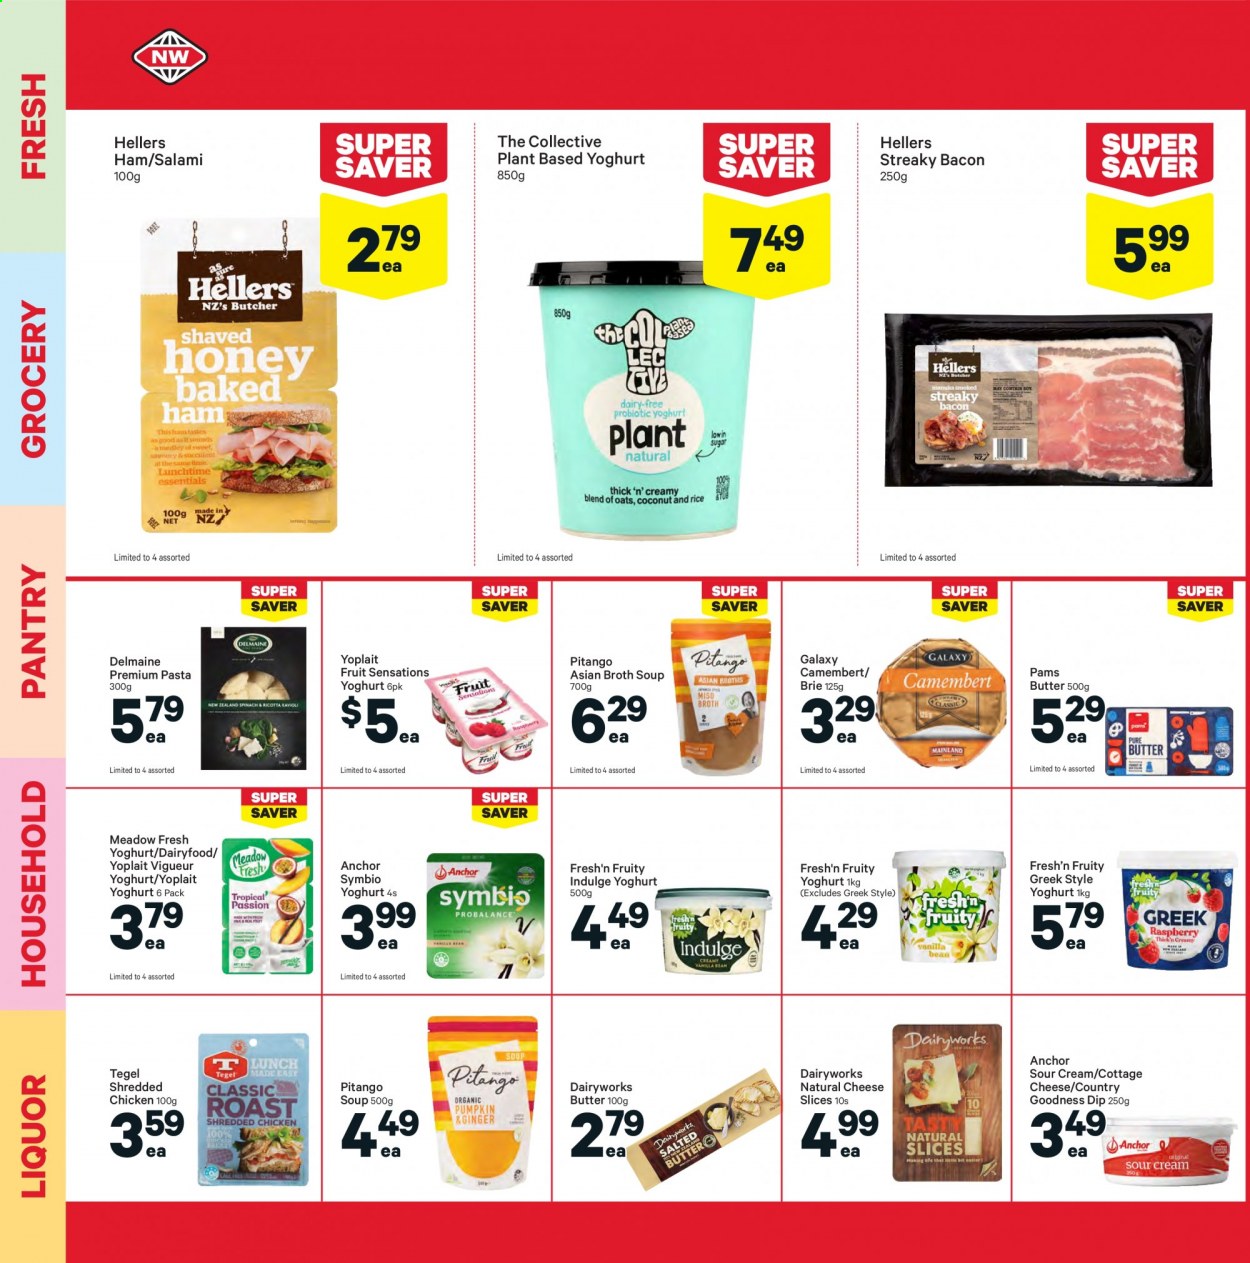 thumbnail - New World mailer - 06.09.2021 - 12.09.2021 - Sales products - soup, pasta, Delmaine, bacon, salami, ham, streaky bacon, camembert, cottage cheese, sliced cheese, cheese, brie, yoghurt, Fresh'n Fruity, Yoplait, butter, Anchor, sour cream, dip, broth, liquor. Page 12.